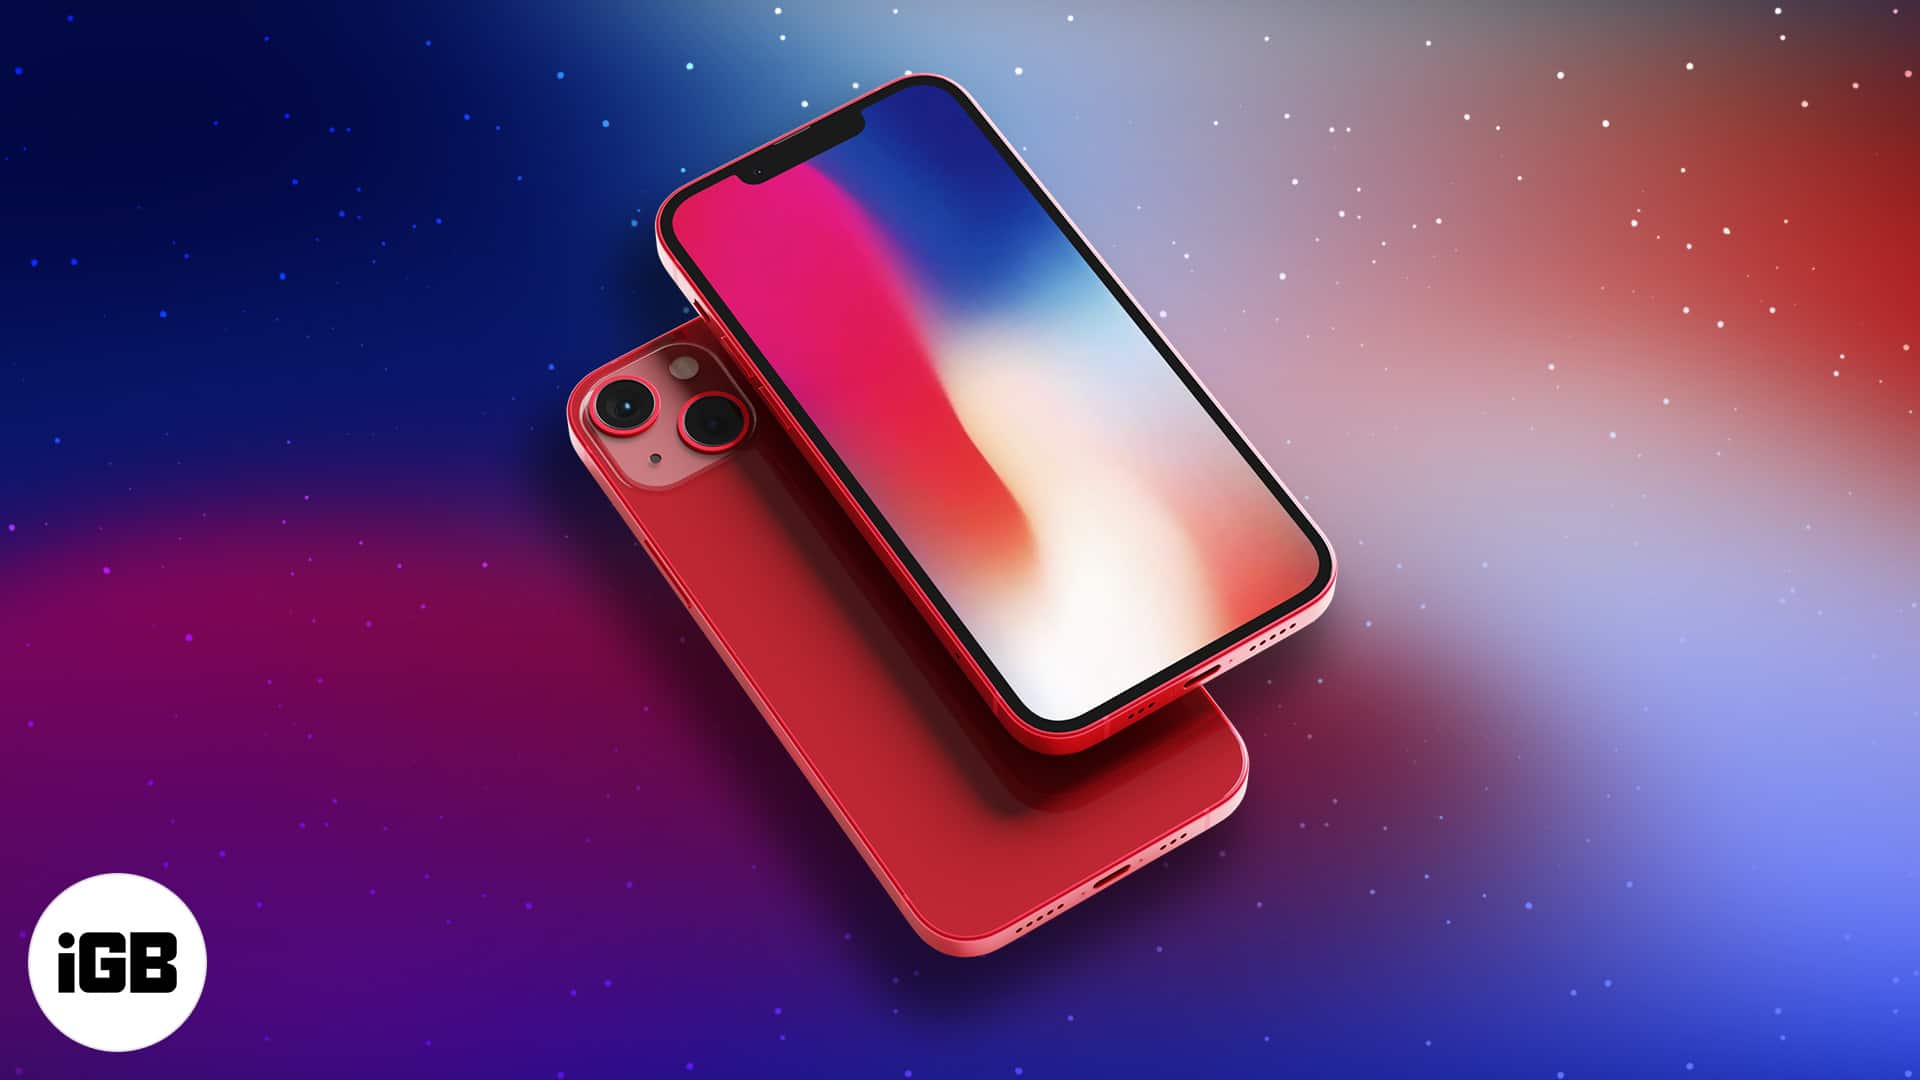 The Best Wallpapers for iPhone X